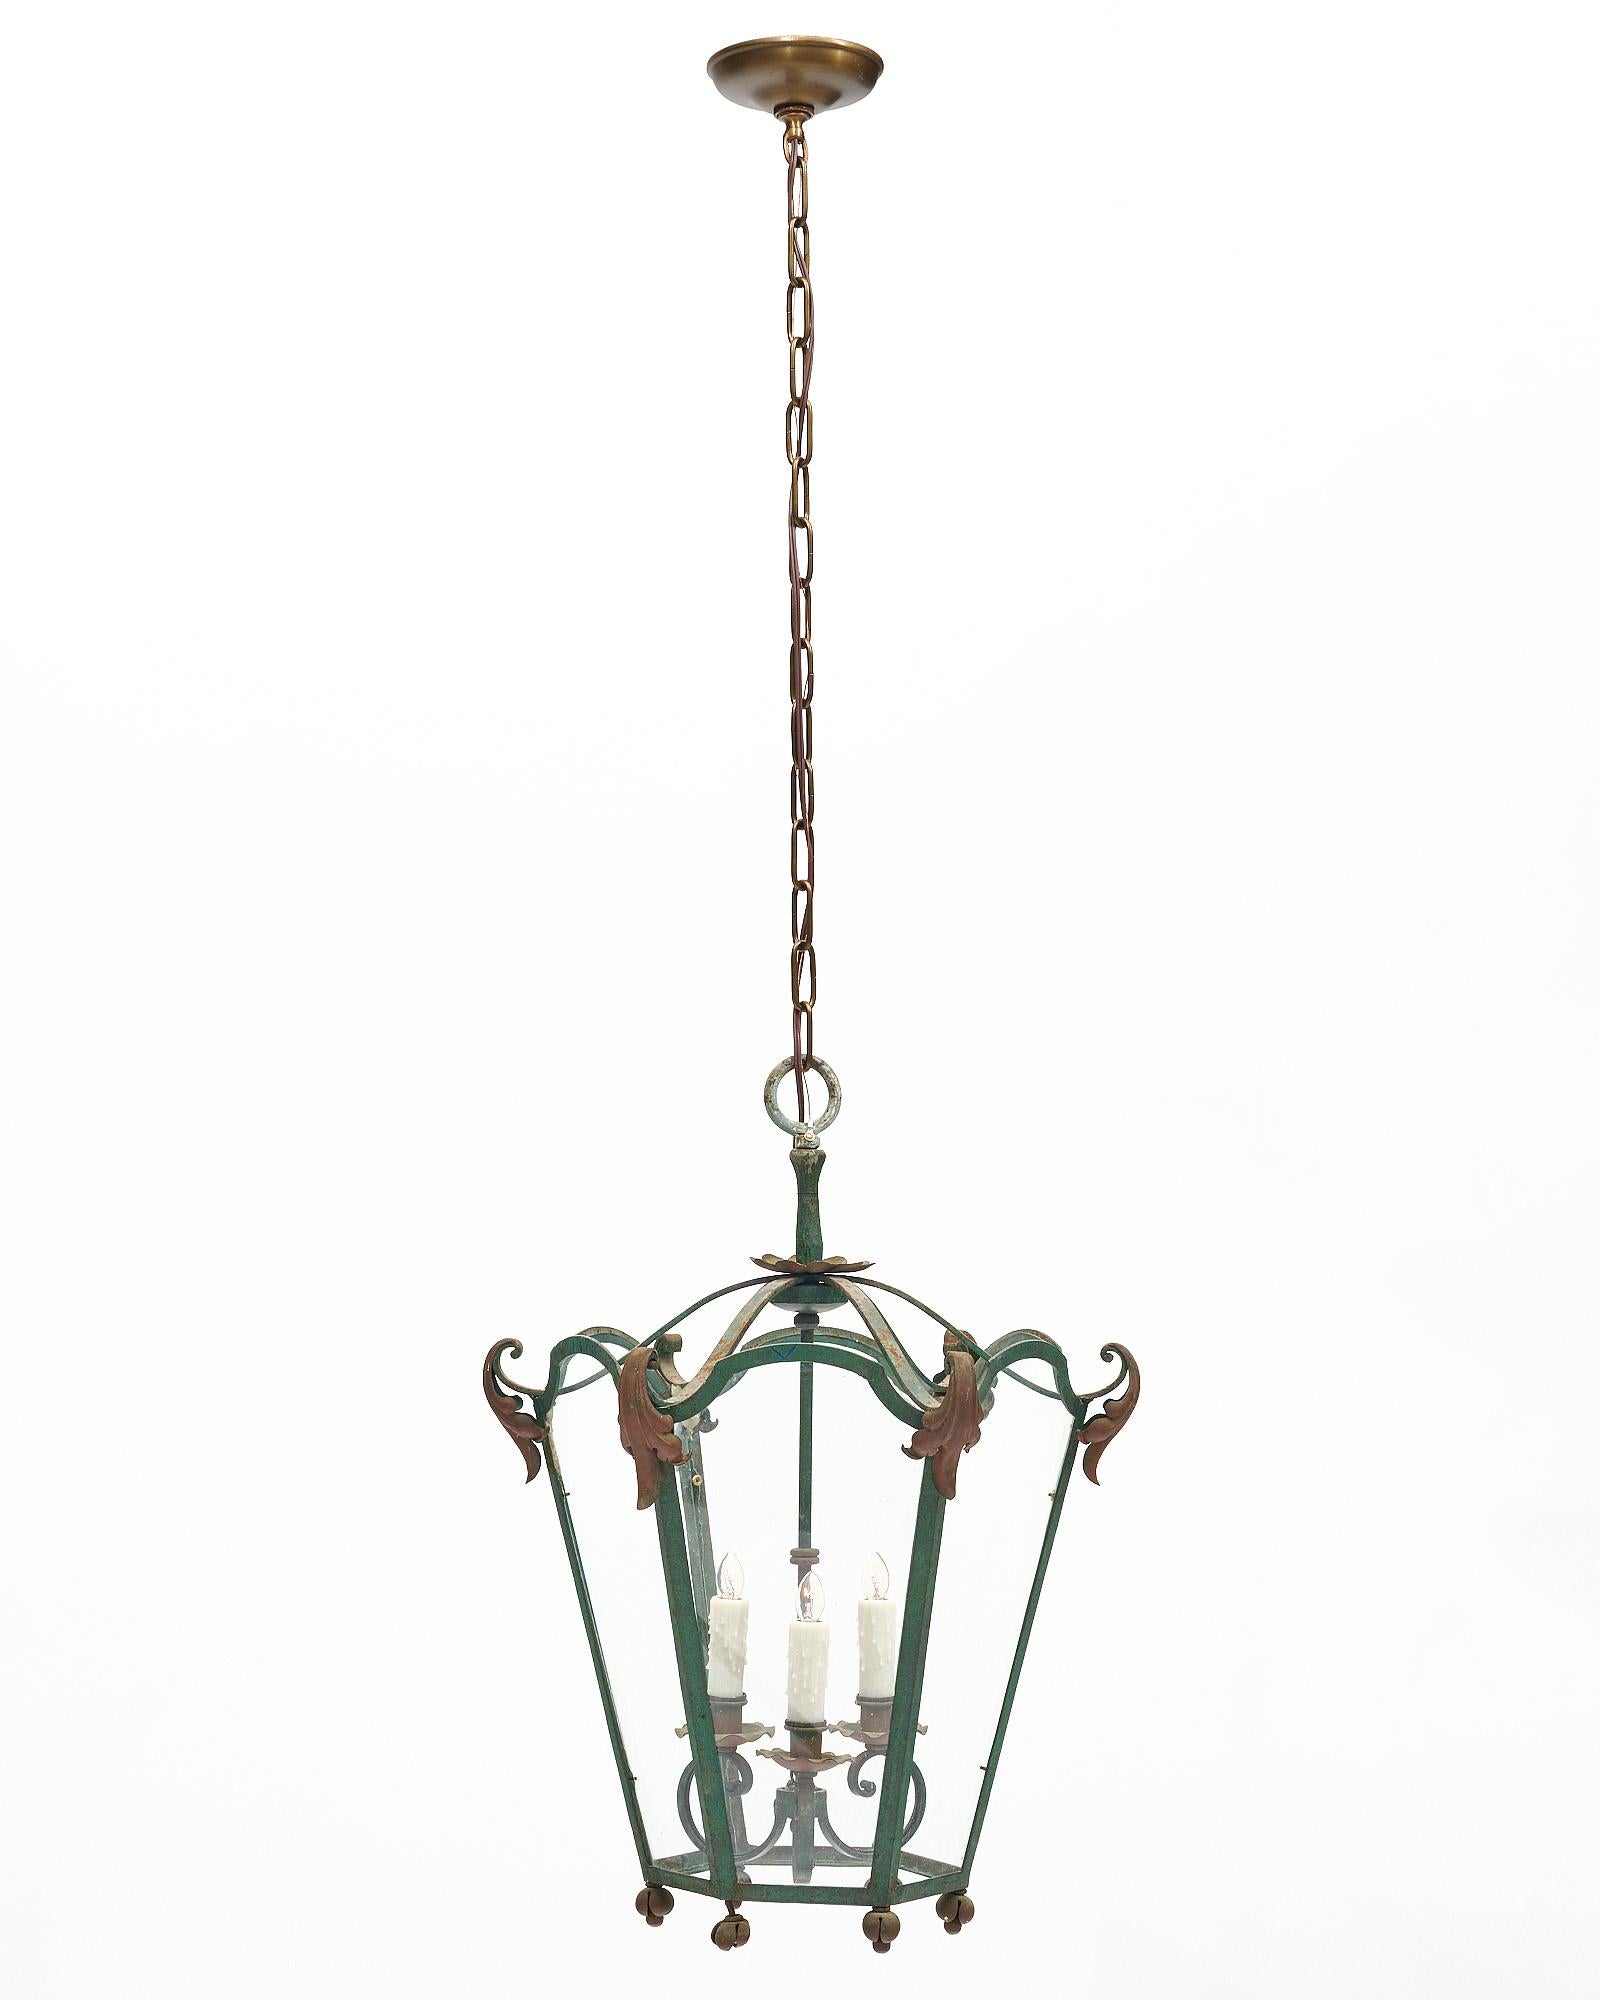 Lantern from the Art Deco period in France. This fixture is made of forged iron with six glass panels surrounding three interior candelabra base lights. Acanthus leaf décor decorates this piece which is green in color. It has been newly wired to fit